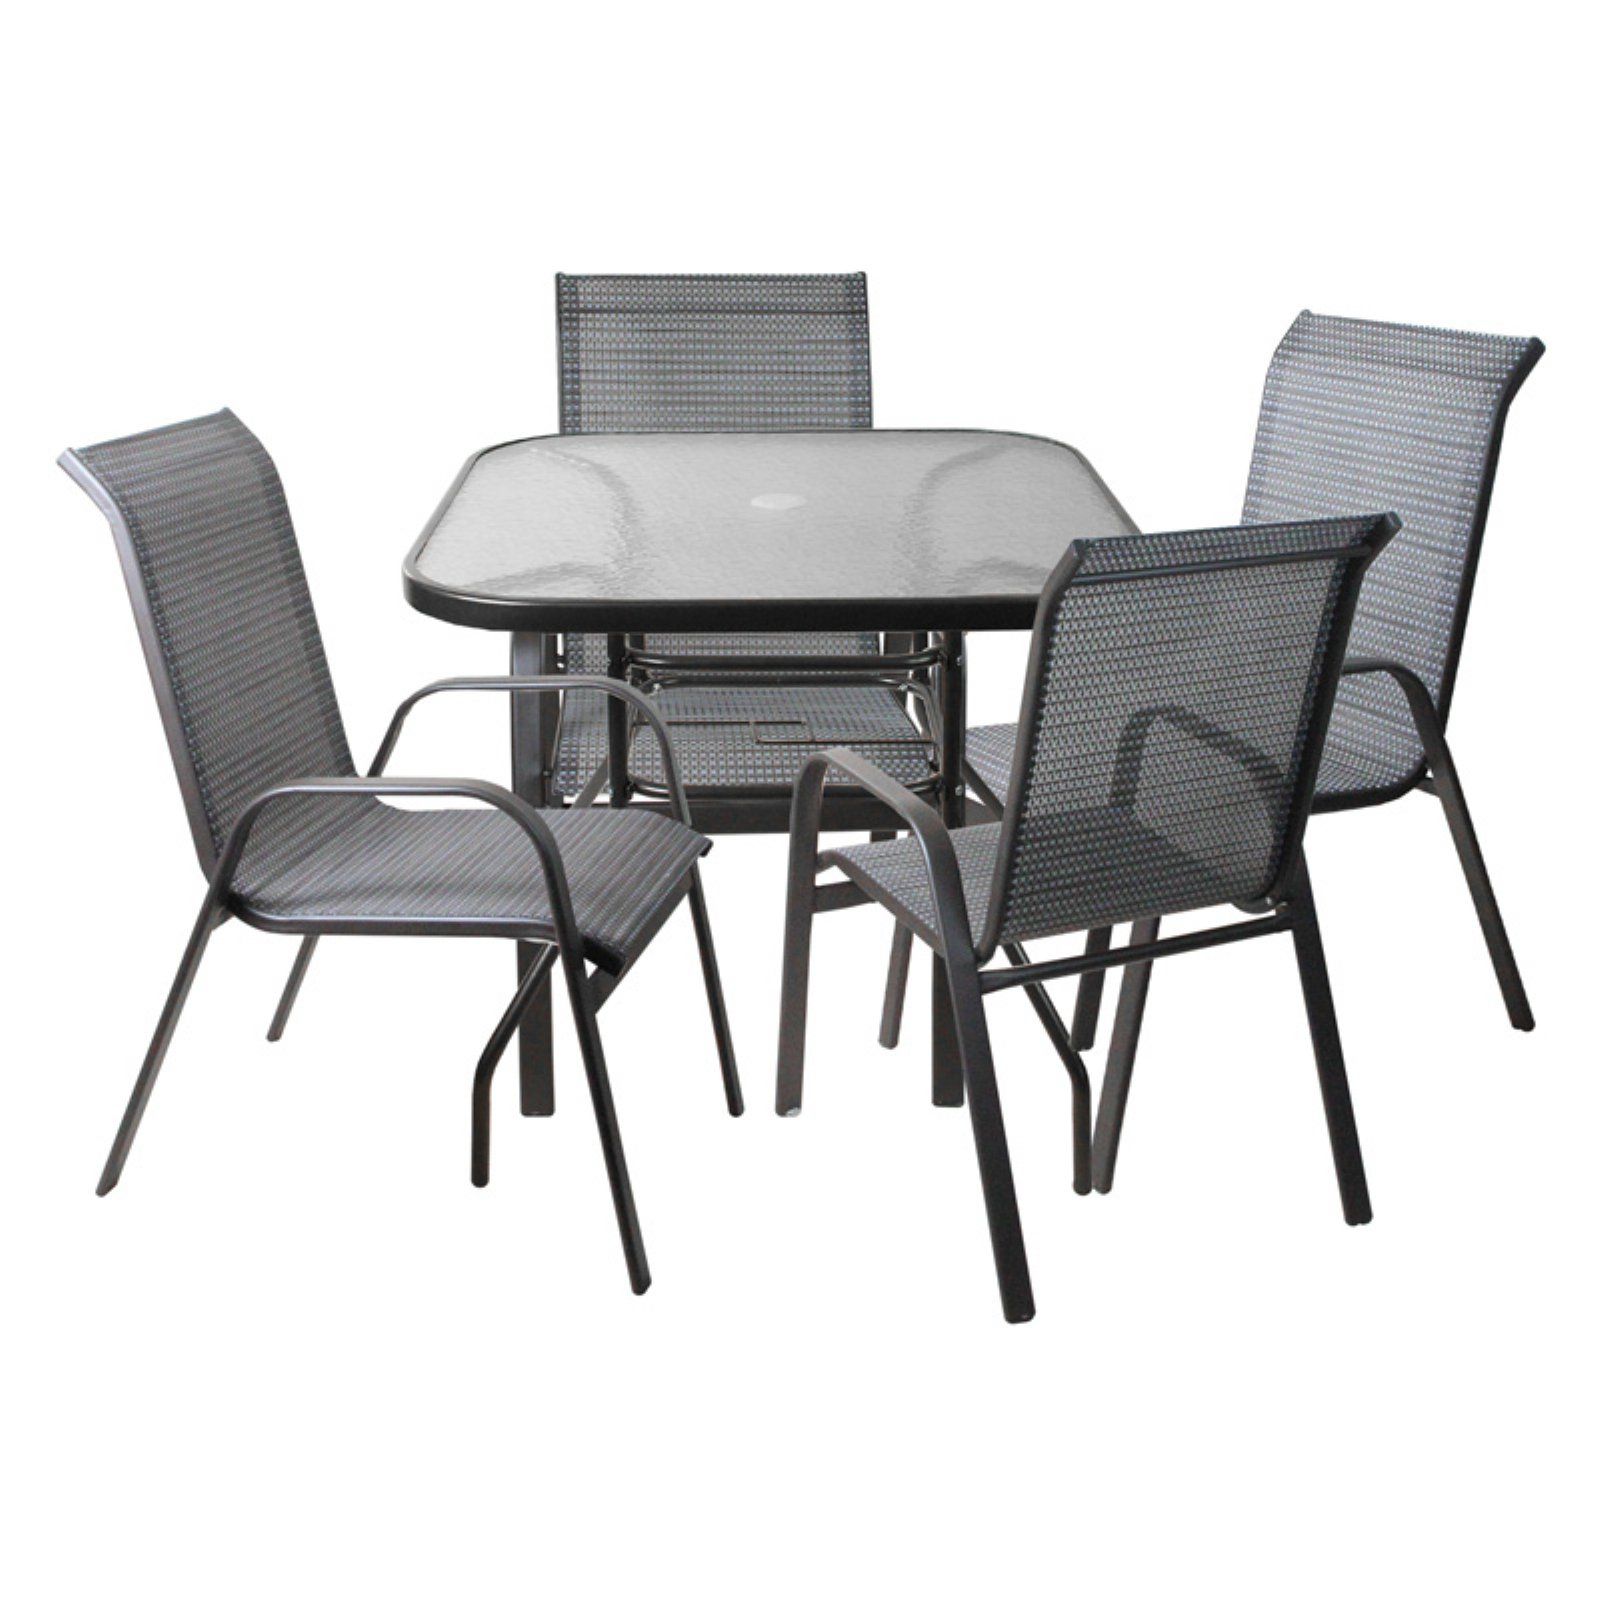 Cc Outdoor Living 5 Piece Outdoor Mesh Textilene And Steel Rectangle Within 5 Piece Patio Sets (View 15 of 15)